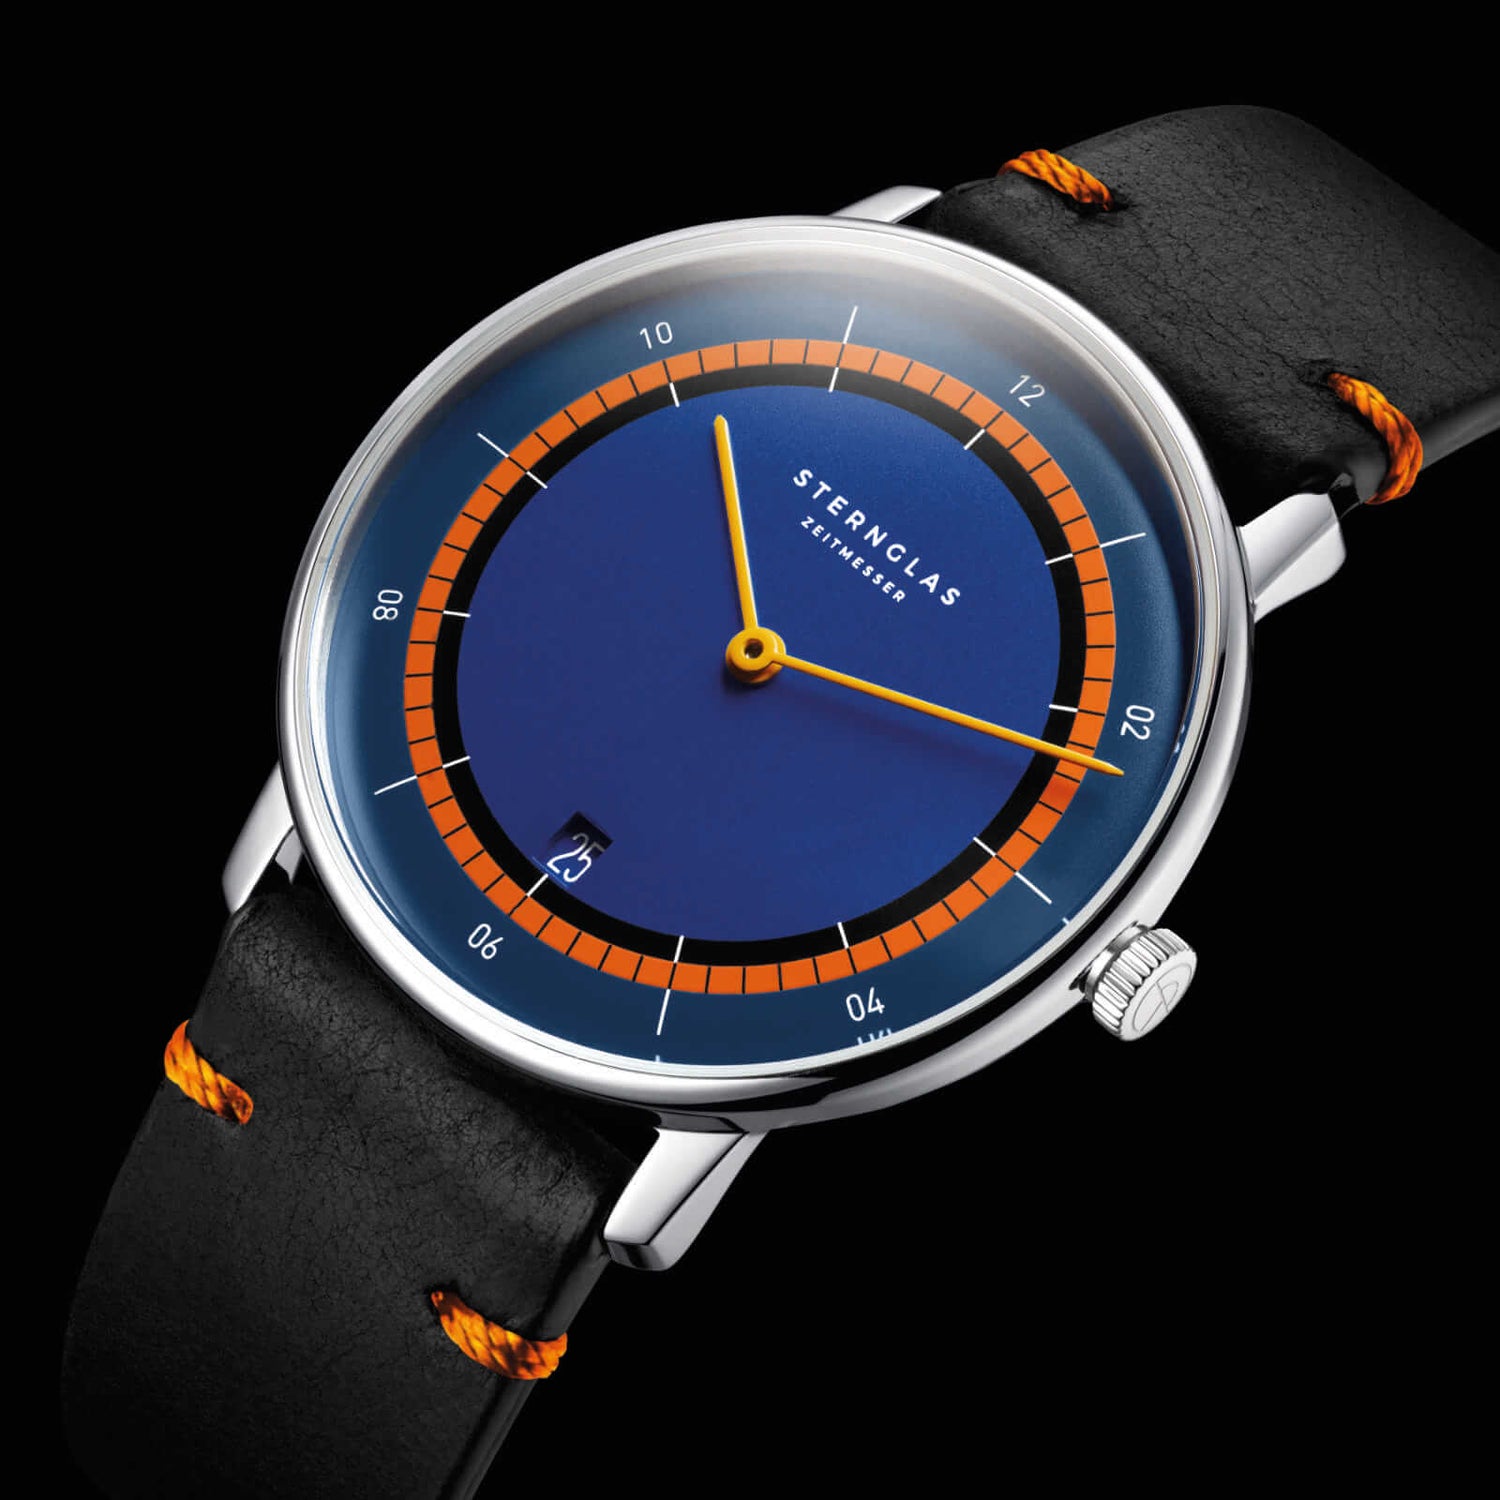 popup|Edition strap in nero-orange|The Naos Edition Küste comes with an edition strap including orange hand stitching to match the dial.